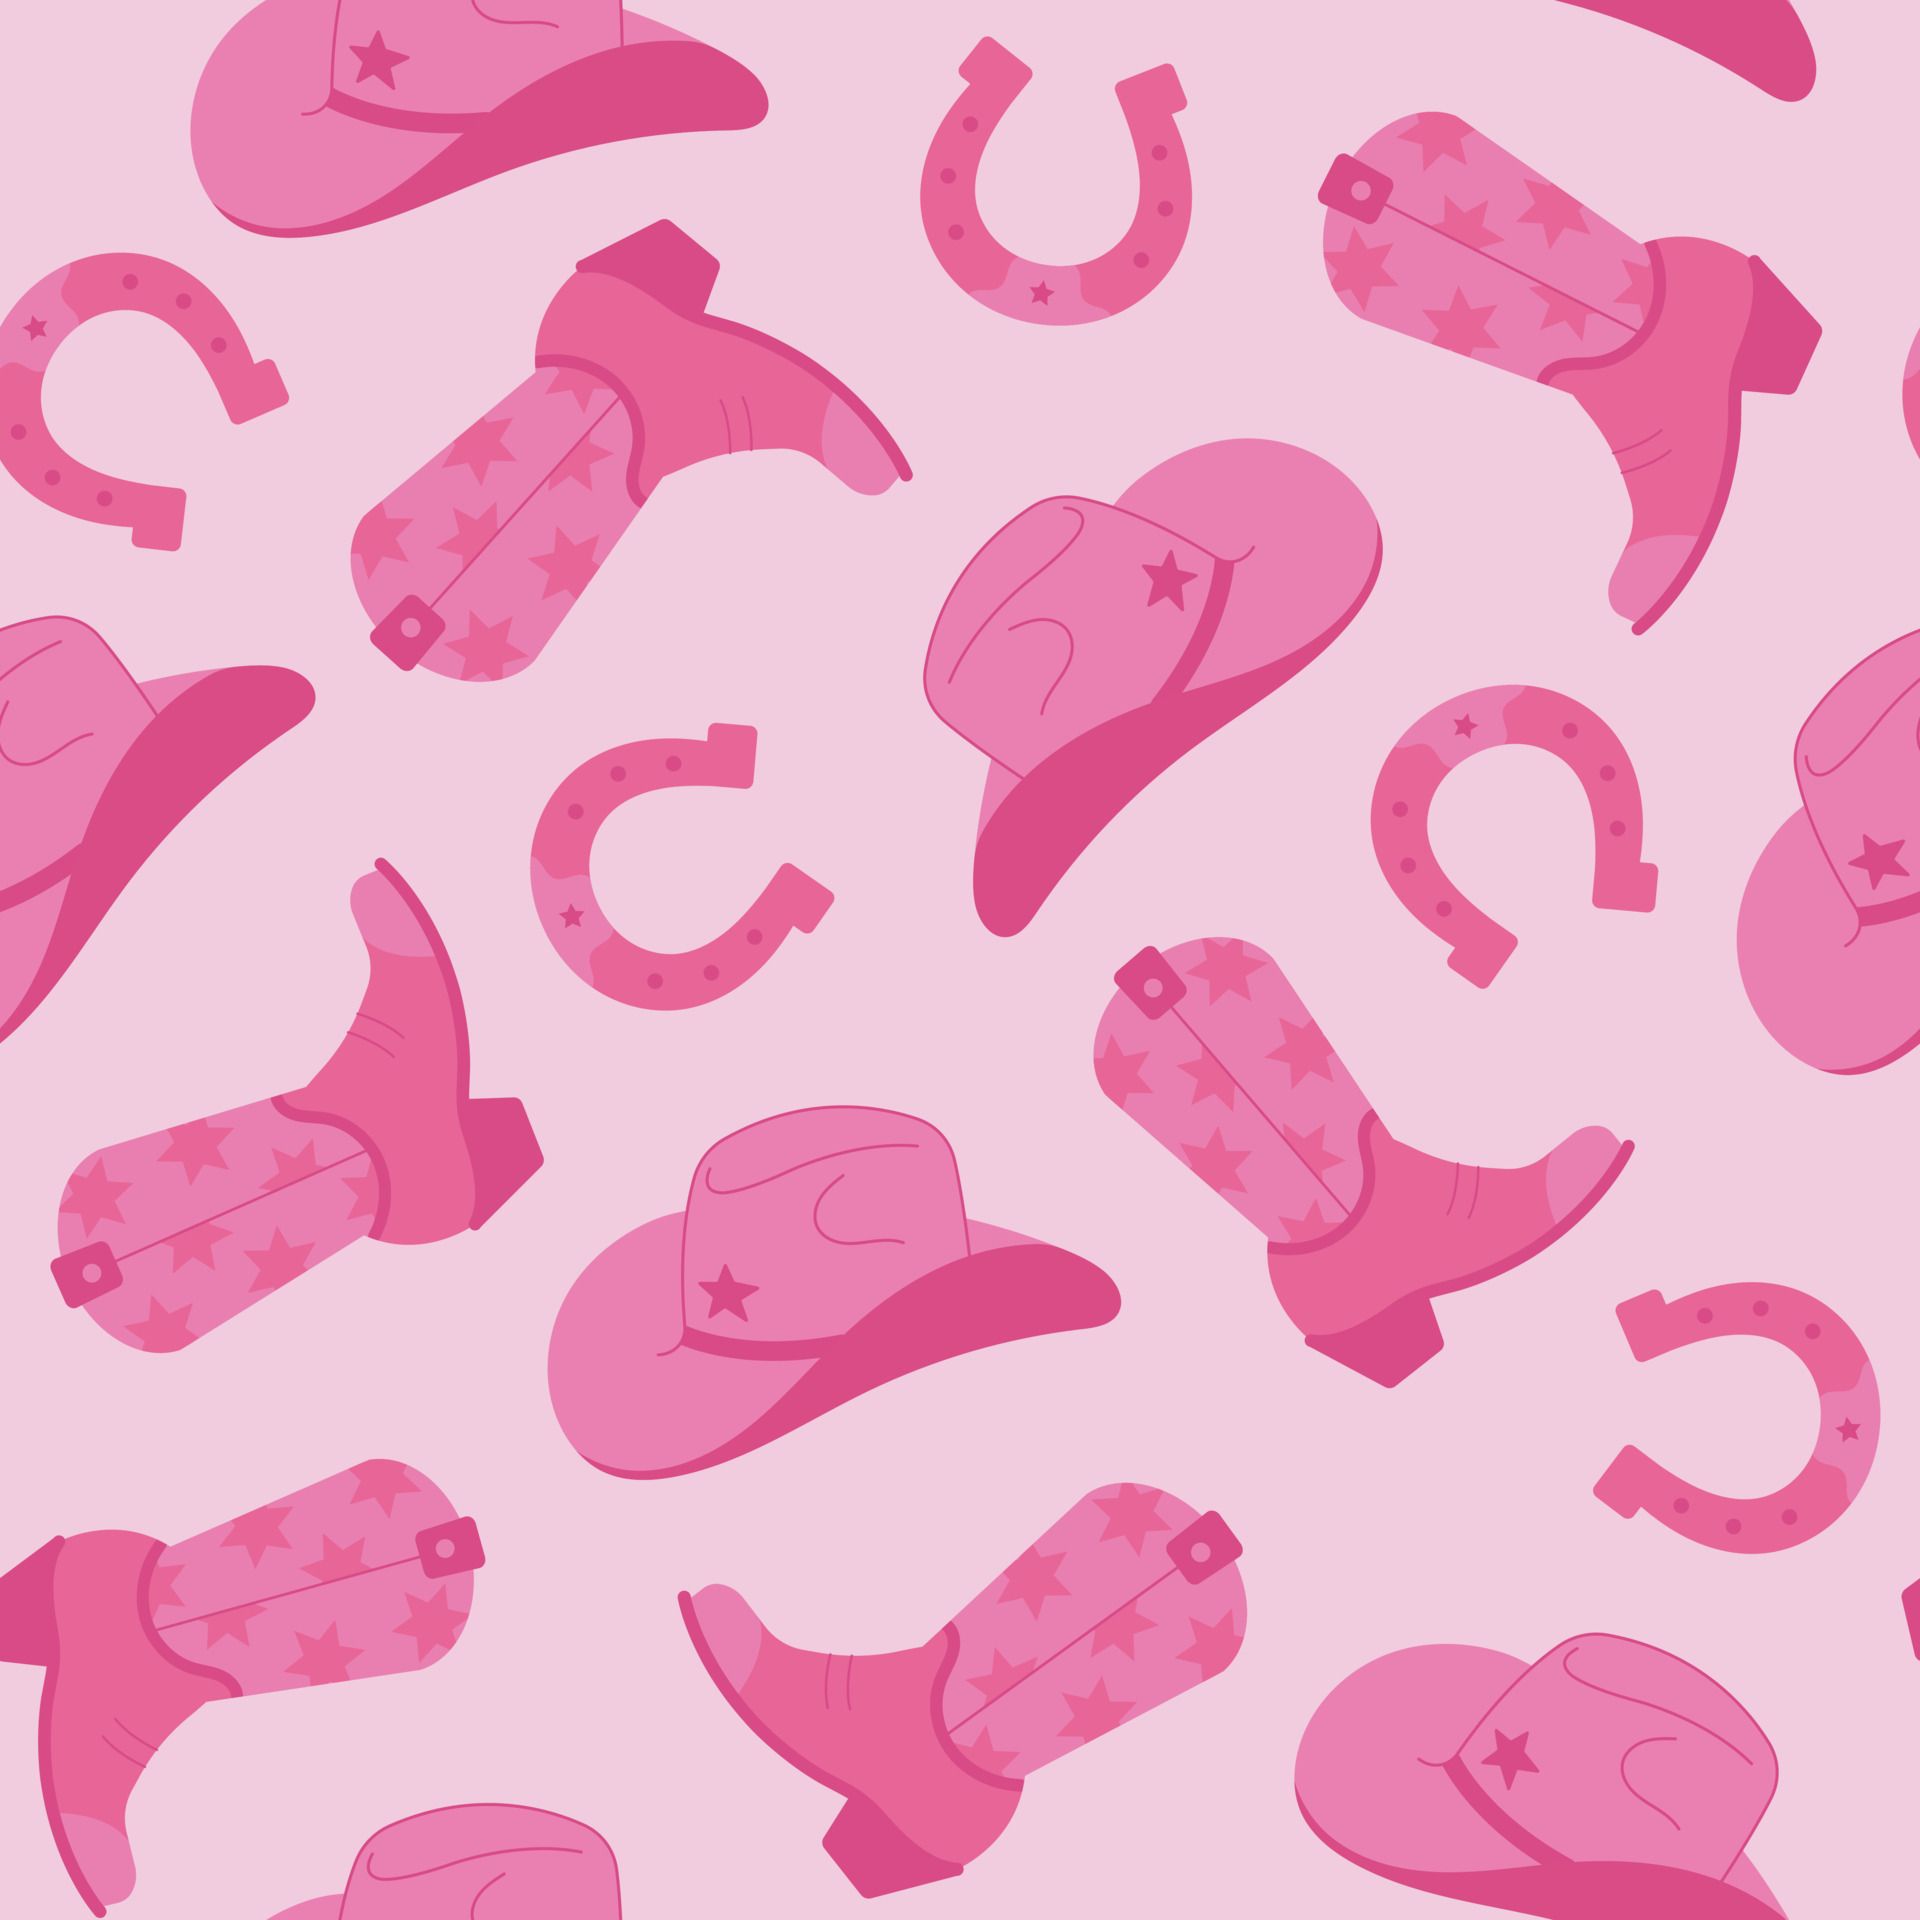 Seamless pattern wild west. Cowgirl vector elements repeating on a pink background. Cowboy hat, boots, horseshoe. Flat style hand drawn wallpaper